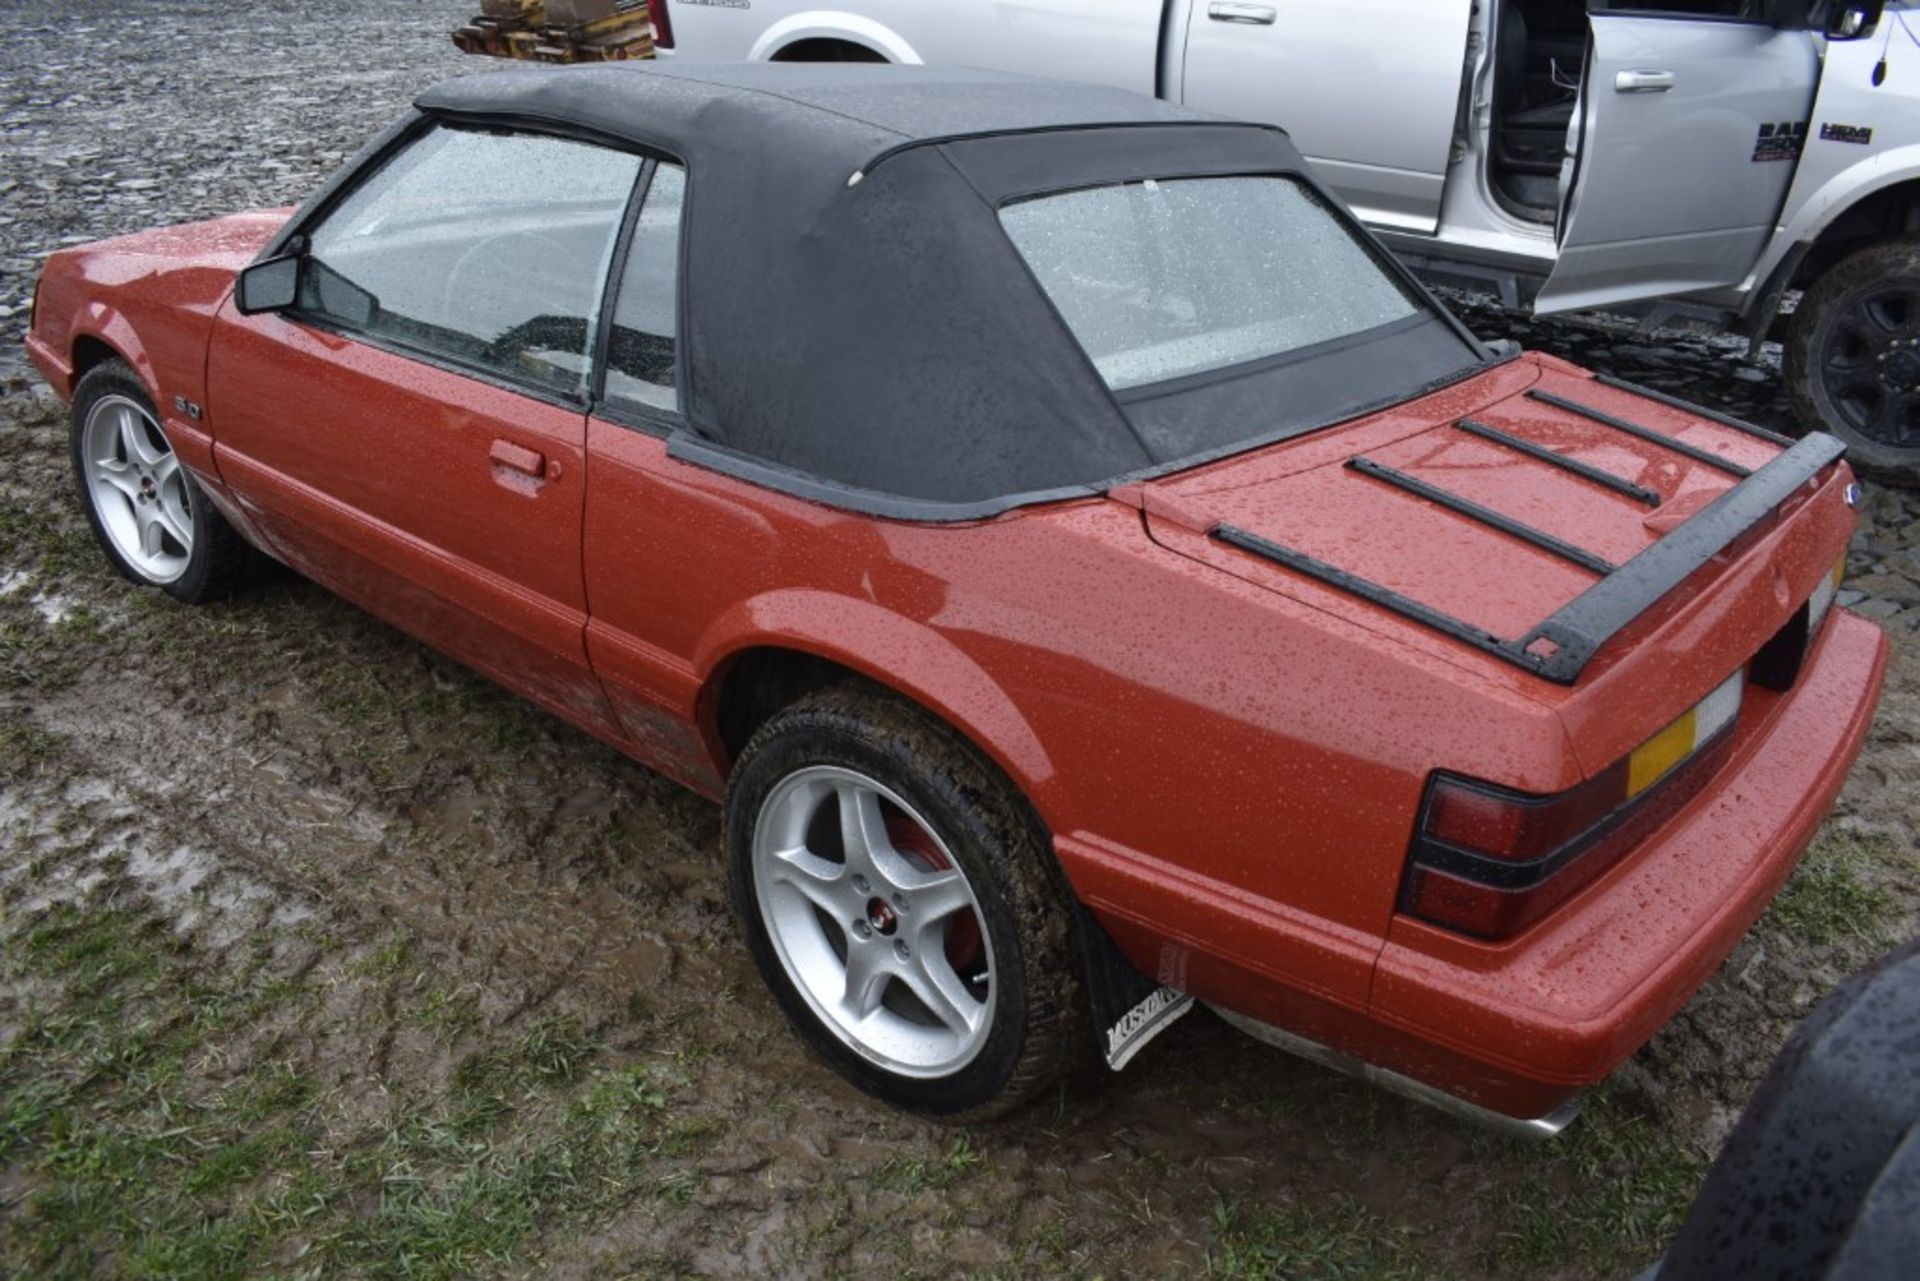 1986 Ford Mustang 5.0 Convertible - Image 8 of 44